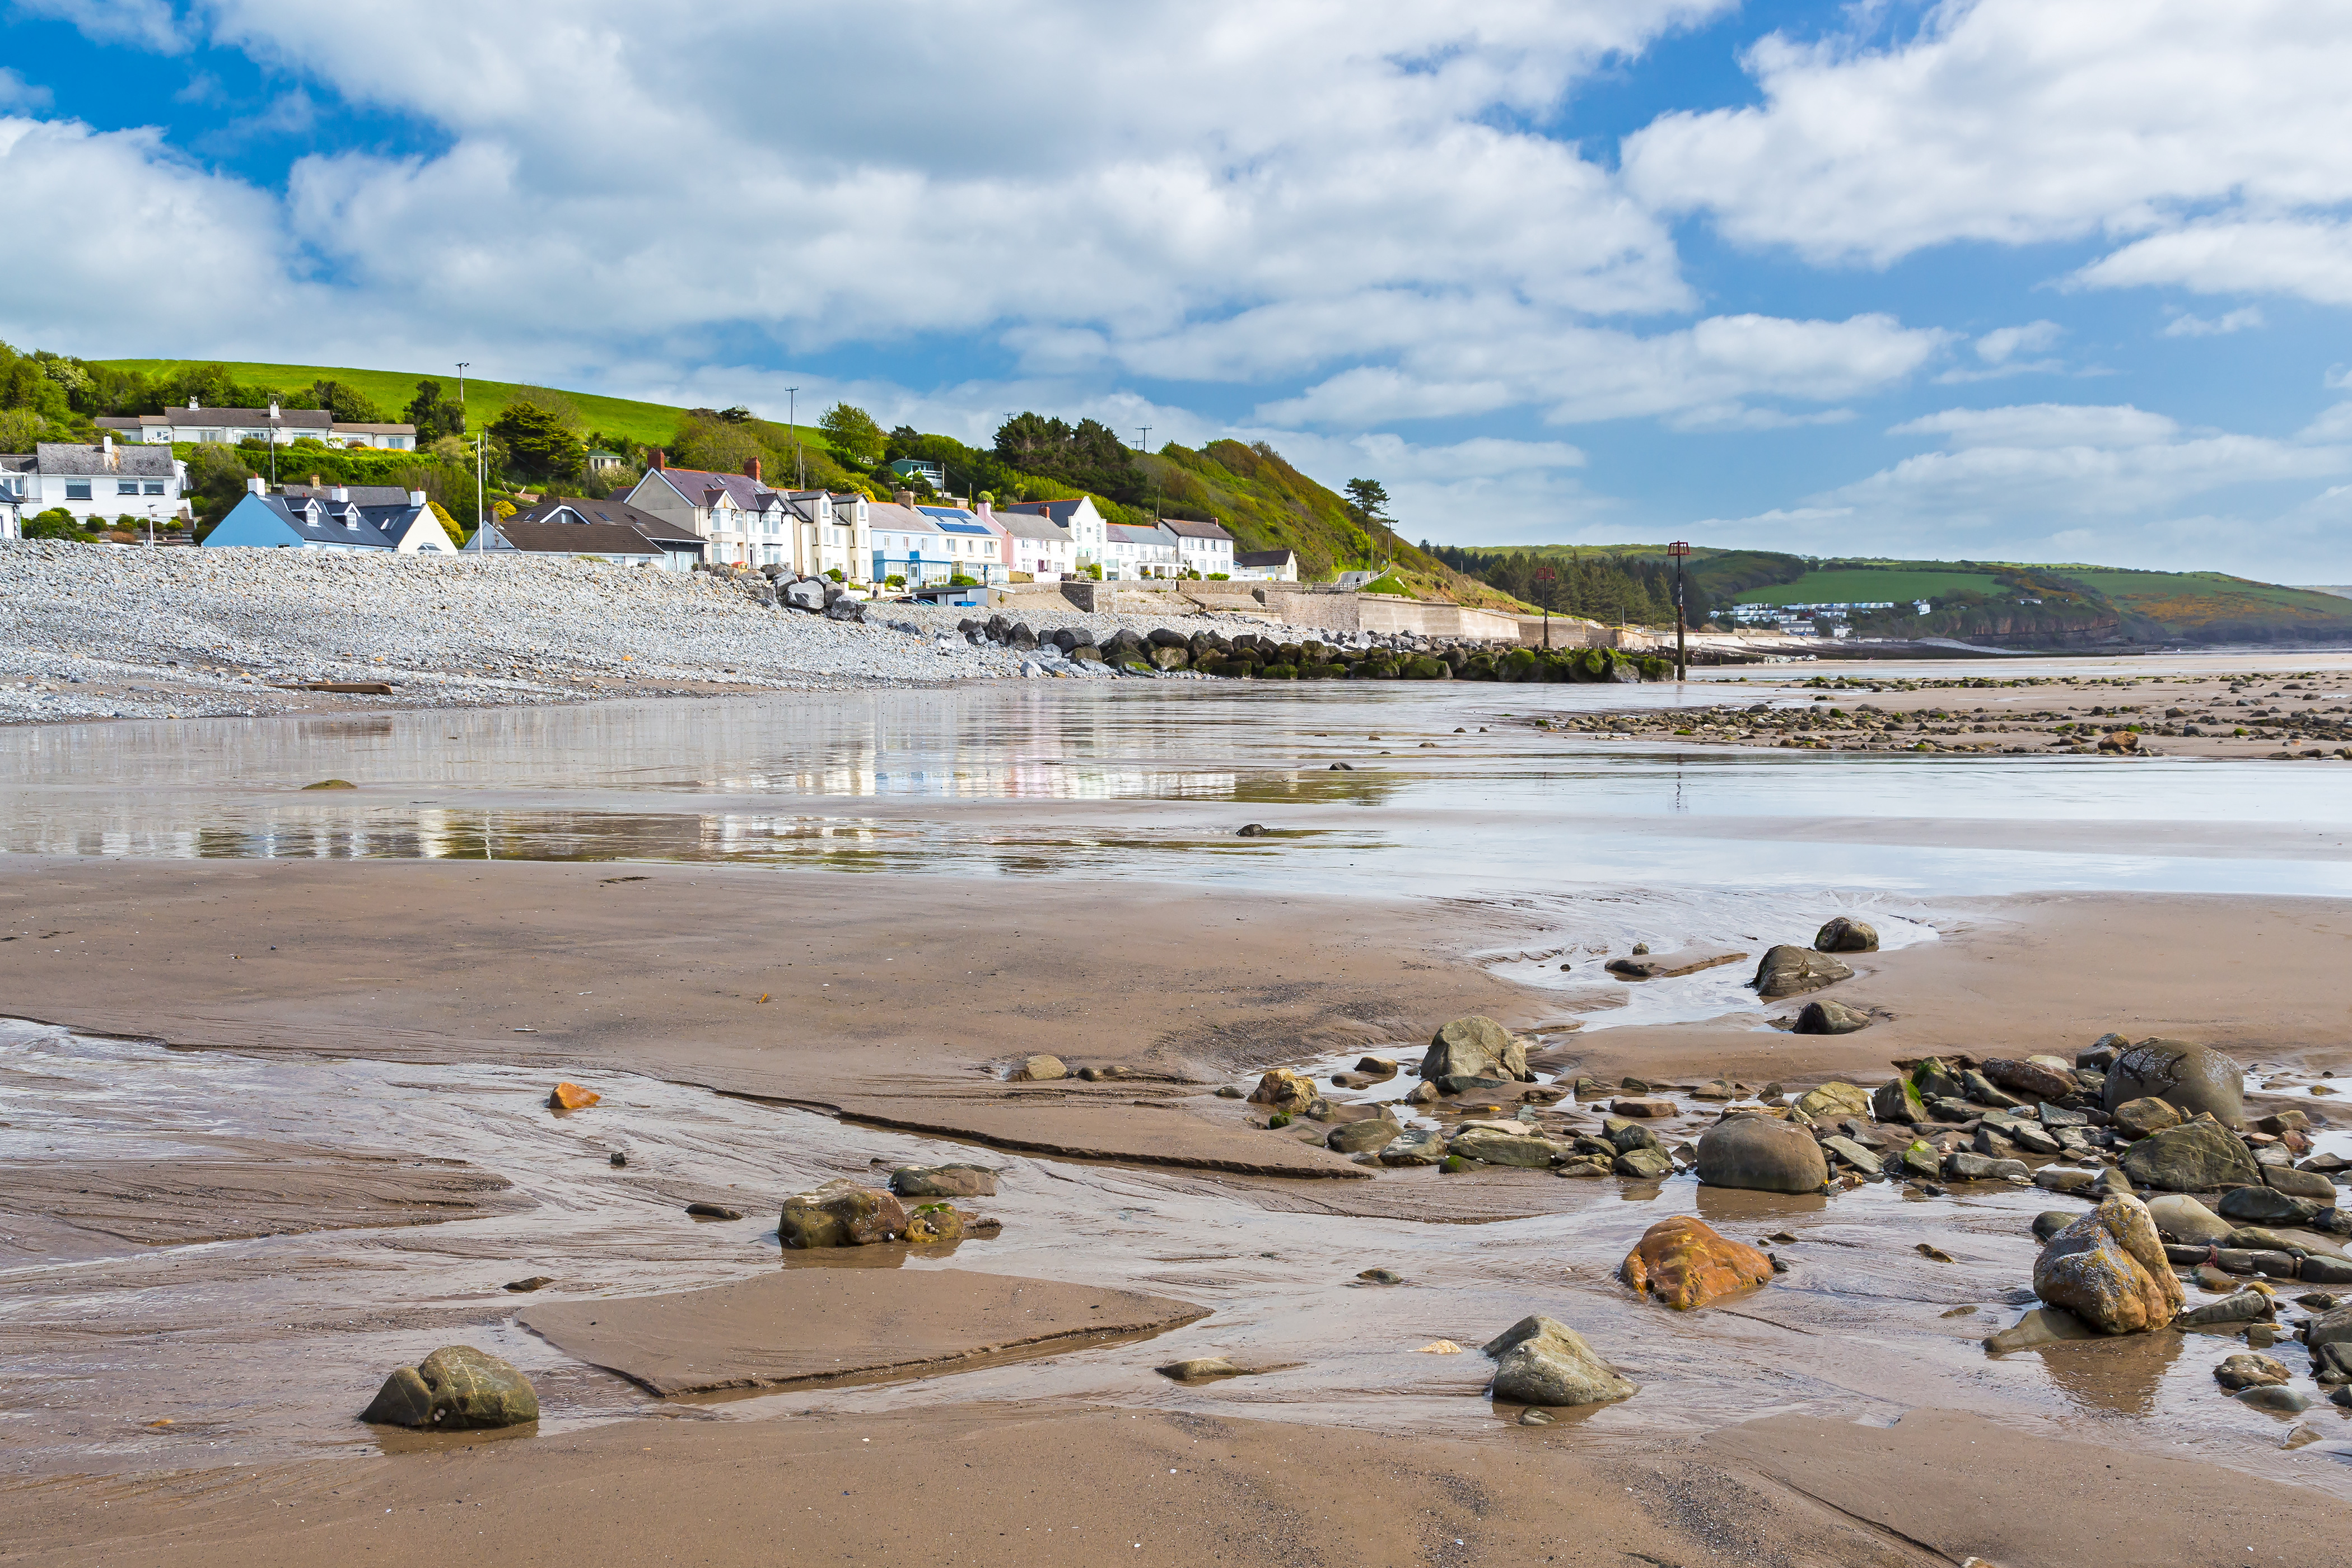 Seaside village of Amroth in the Pembrokeshire Coast National Park